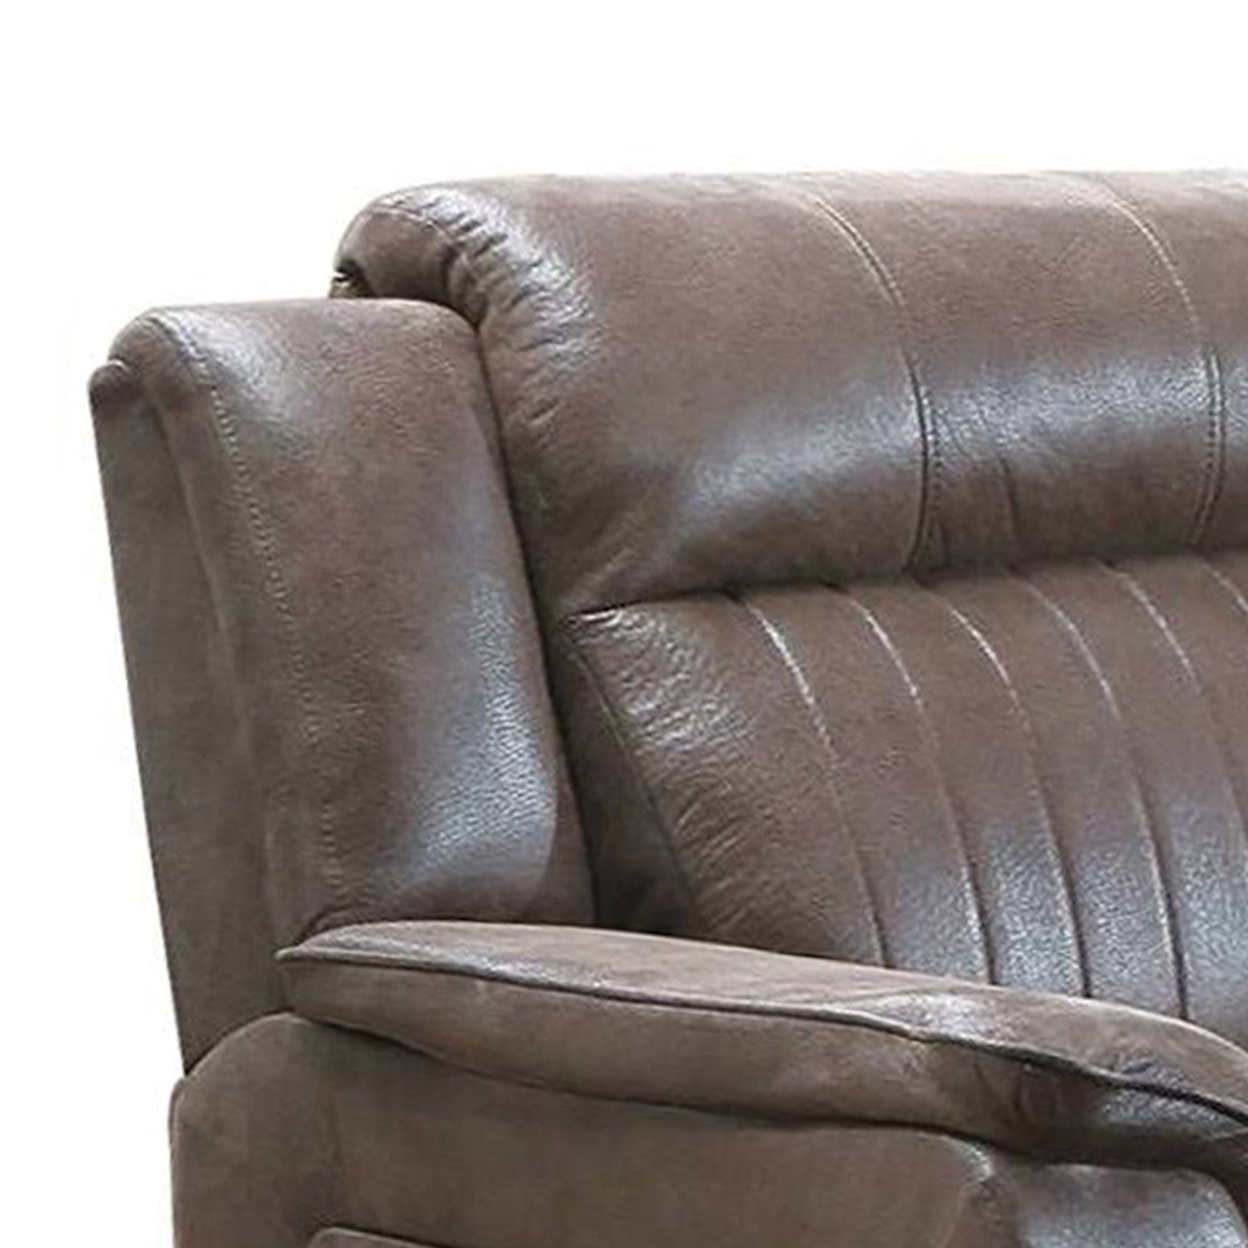 Oya 40 Inch Power Recliner Chair, Pull Tab Mechanism, Rich Brown Leather